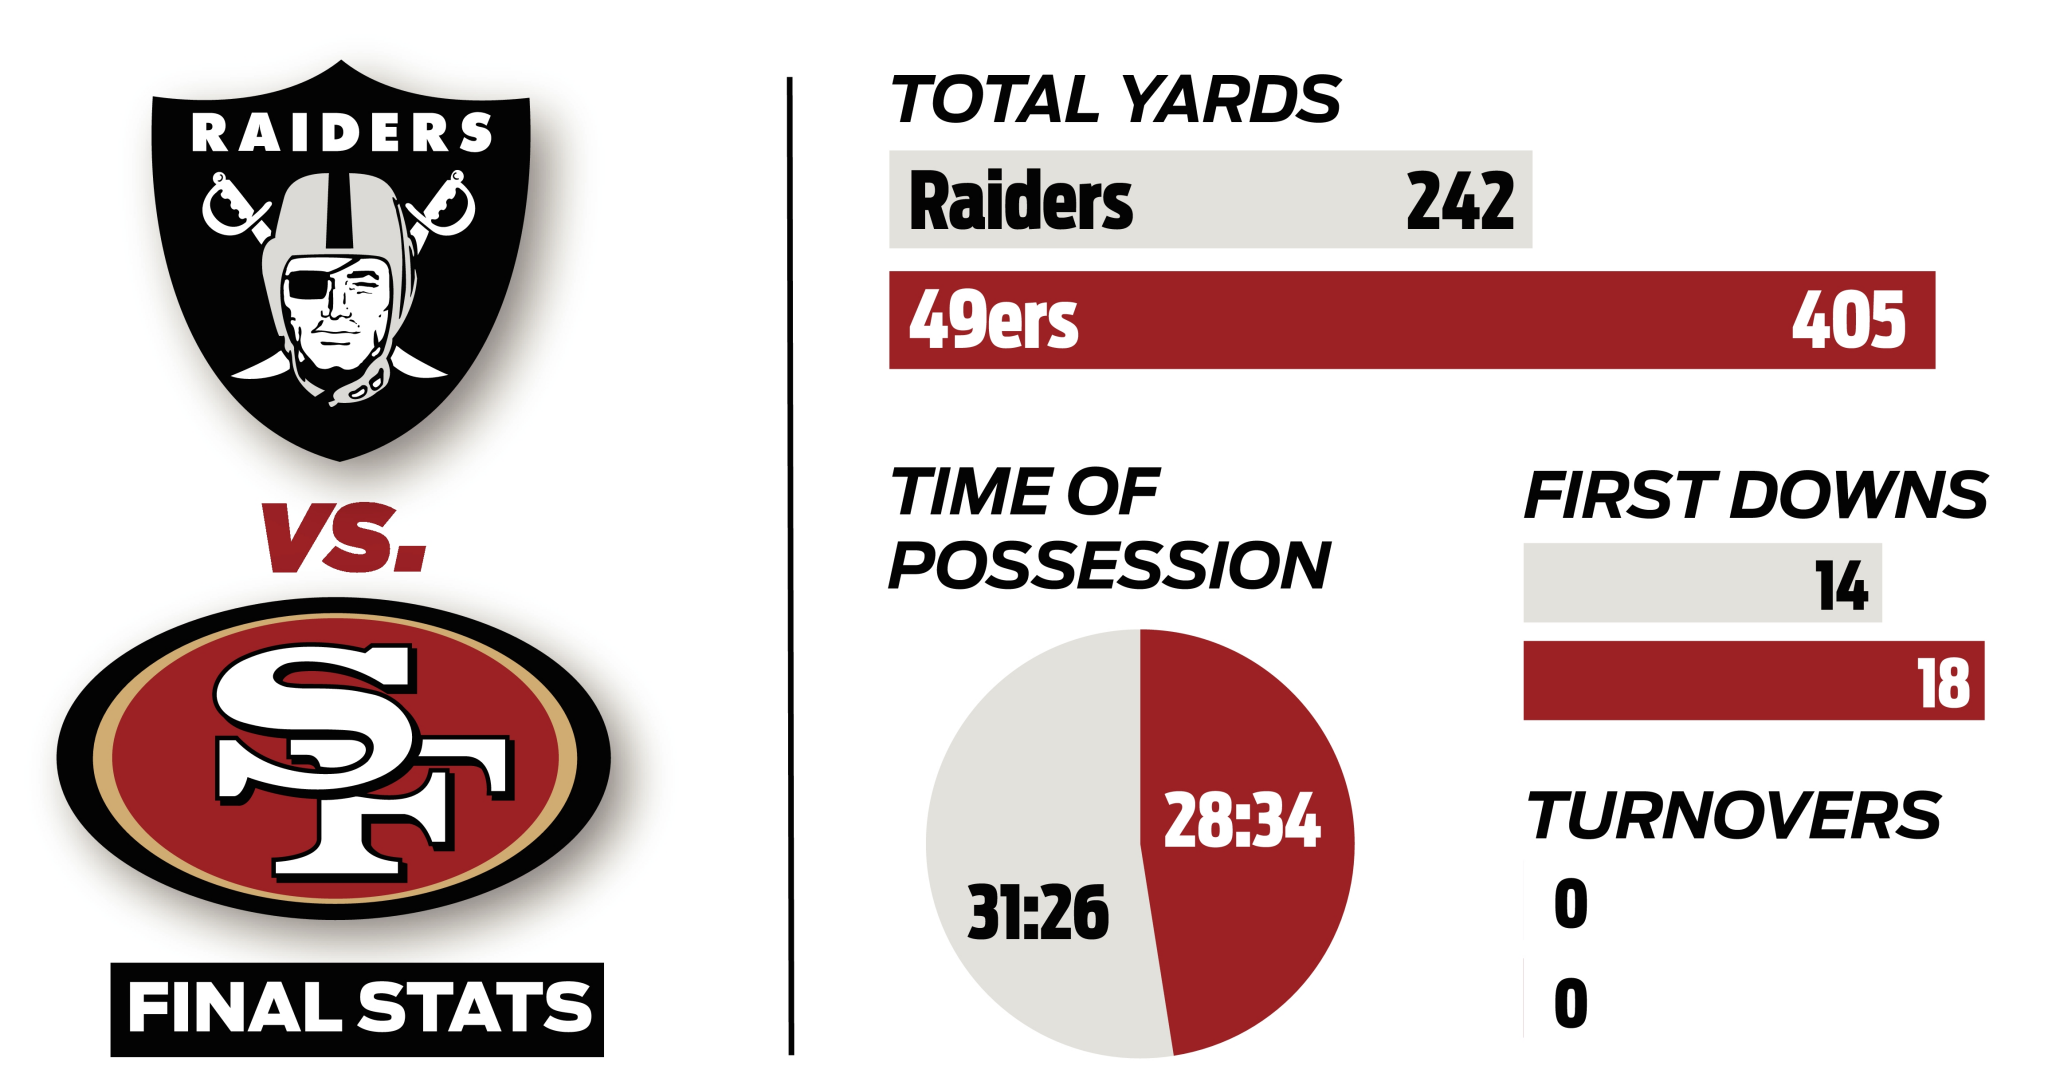 Raiders49ers by the numbers